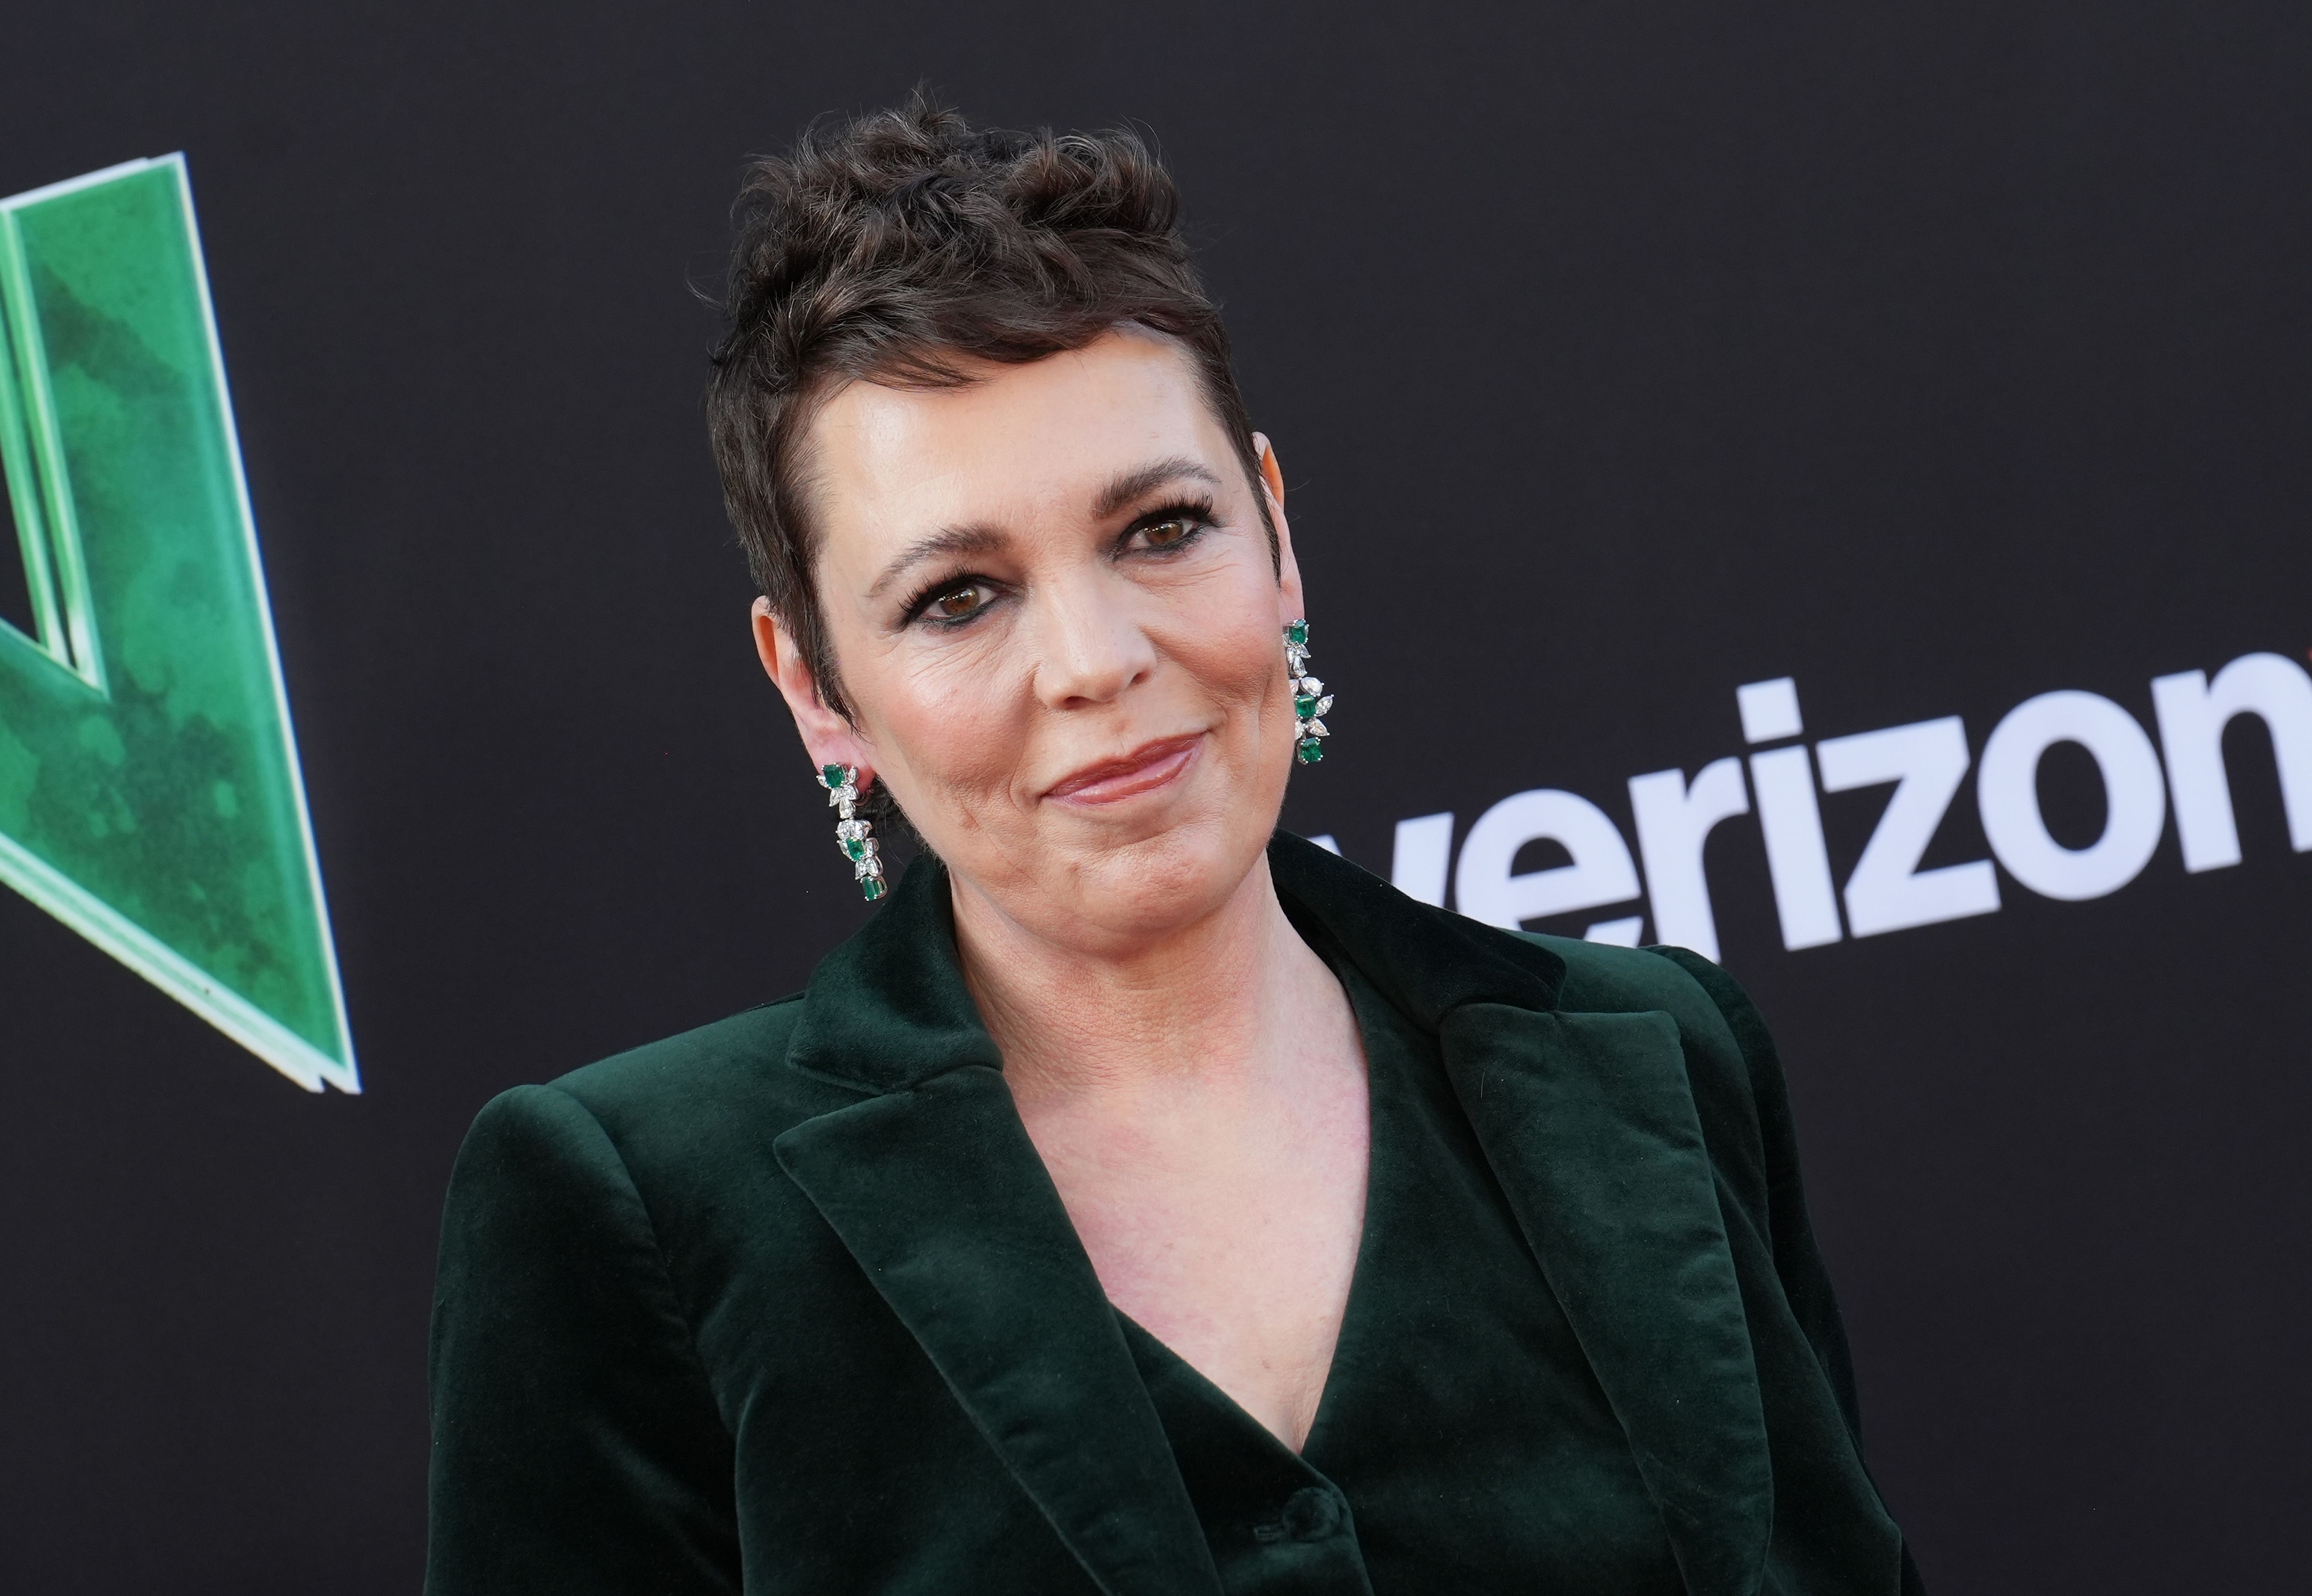 Olivia Colman in a velvet blazer with statement earrings at an event